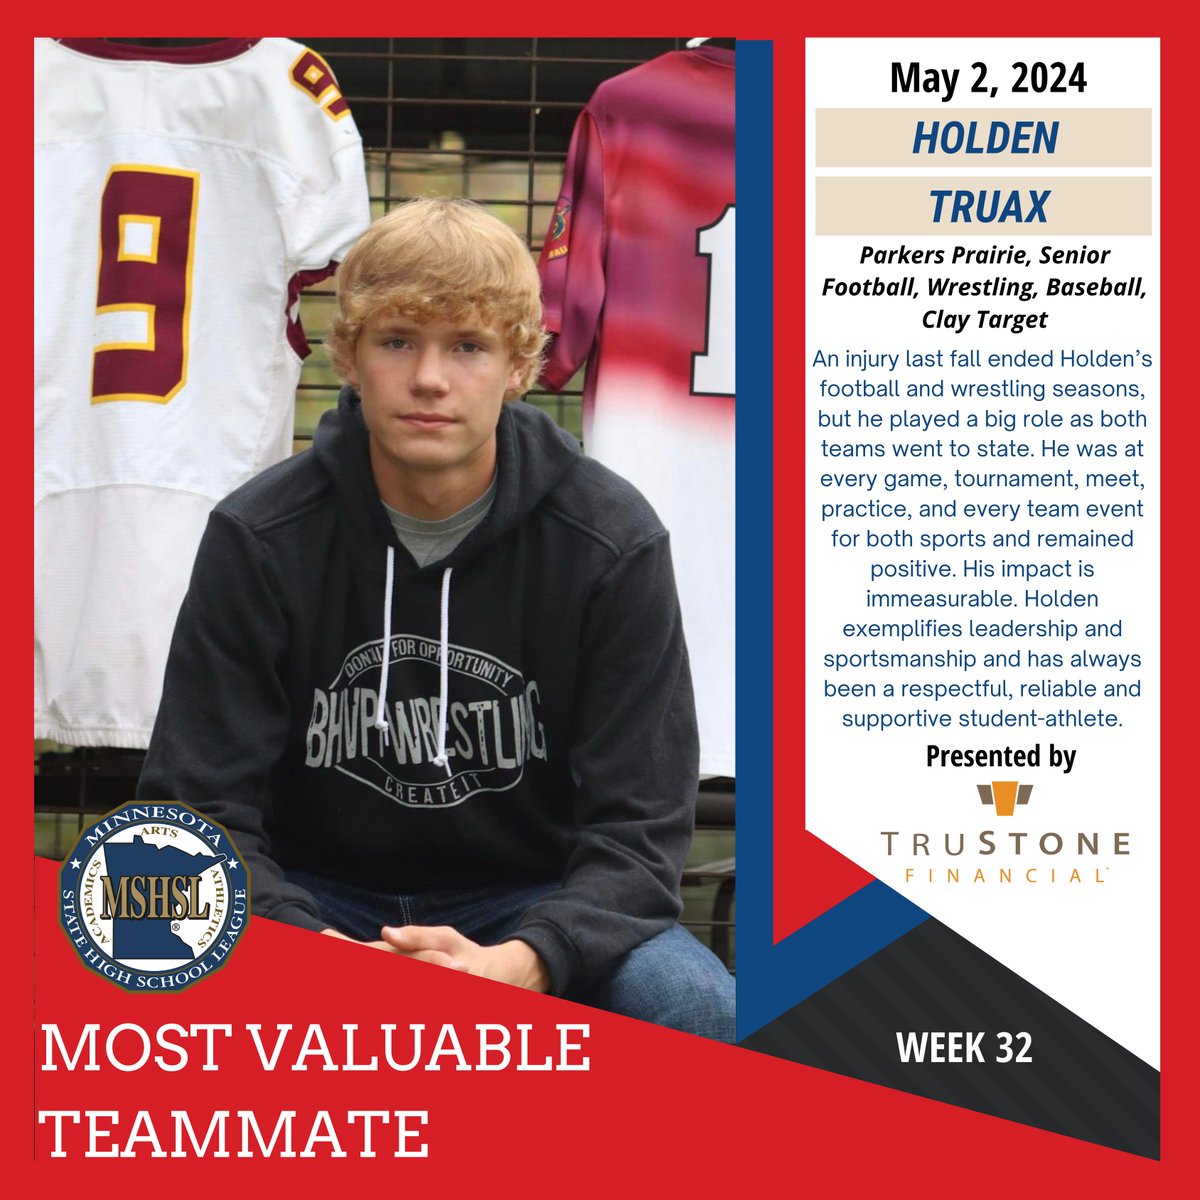 Congratulations to this week's #mshsl Most Valuable Teammate, Holden Truax of Parkers Prairie. MVT is sponsored by @TruStoneFCU